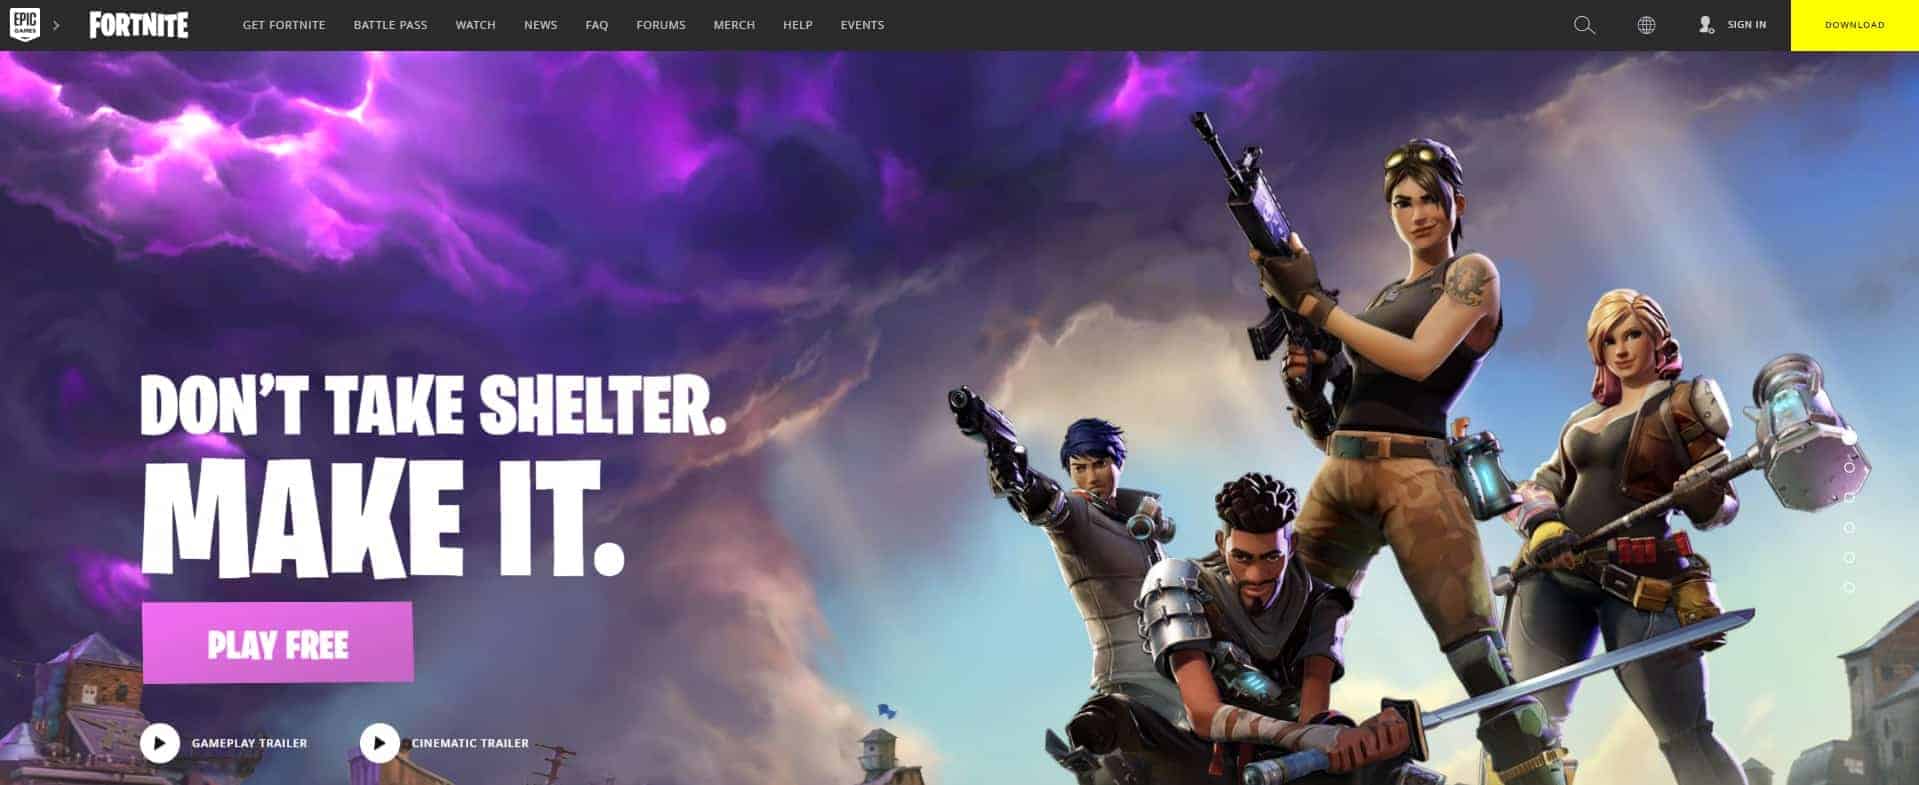 how to play fortnite from anywhere with a vpn - how to unblock fortnite xbox